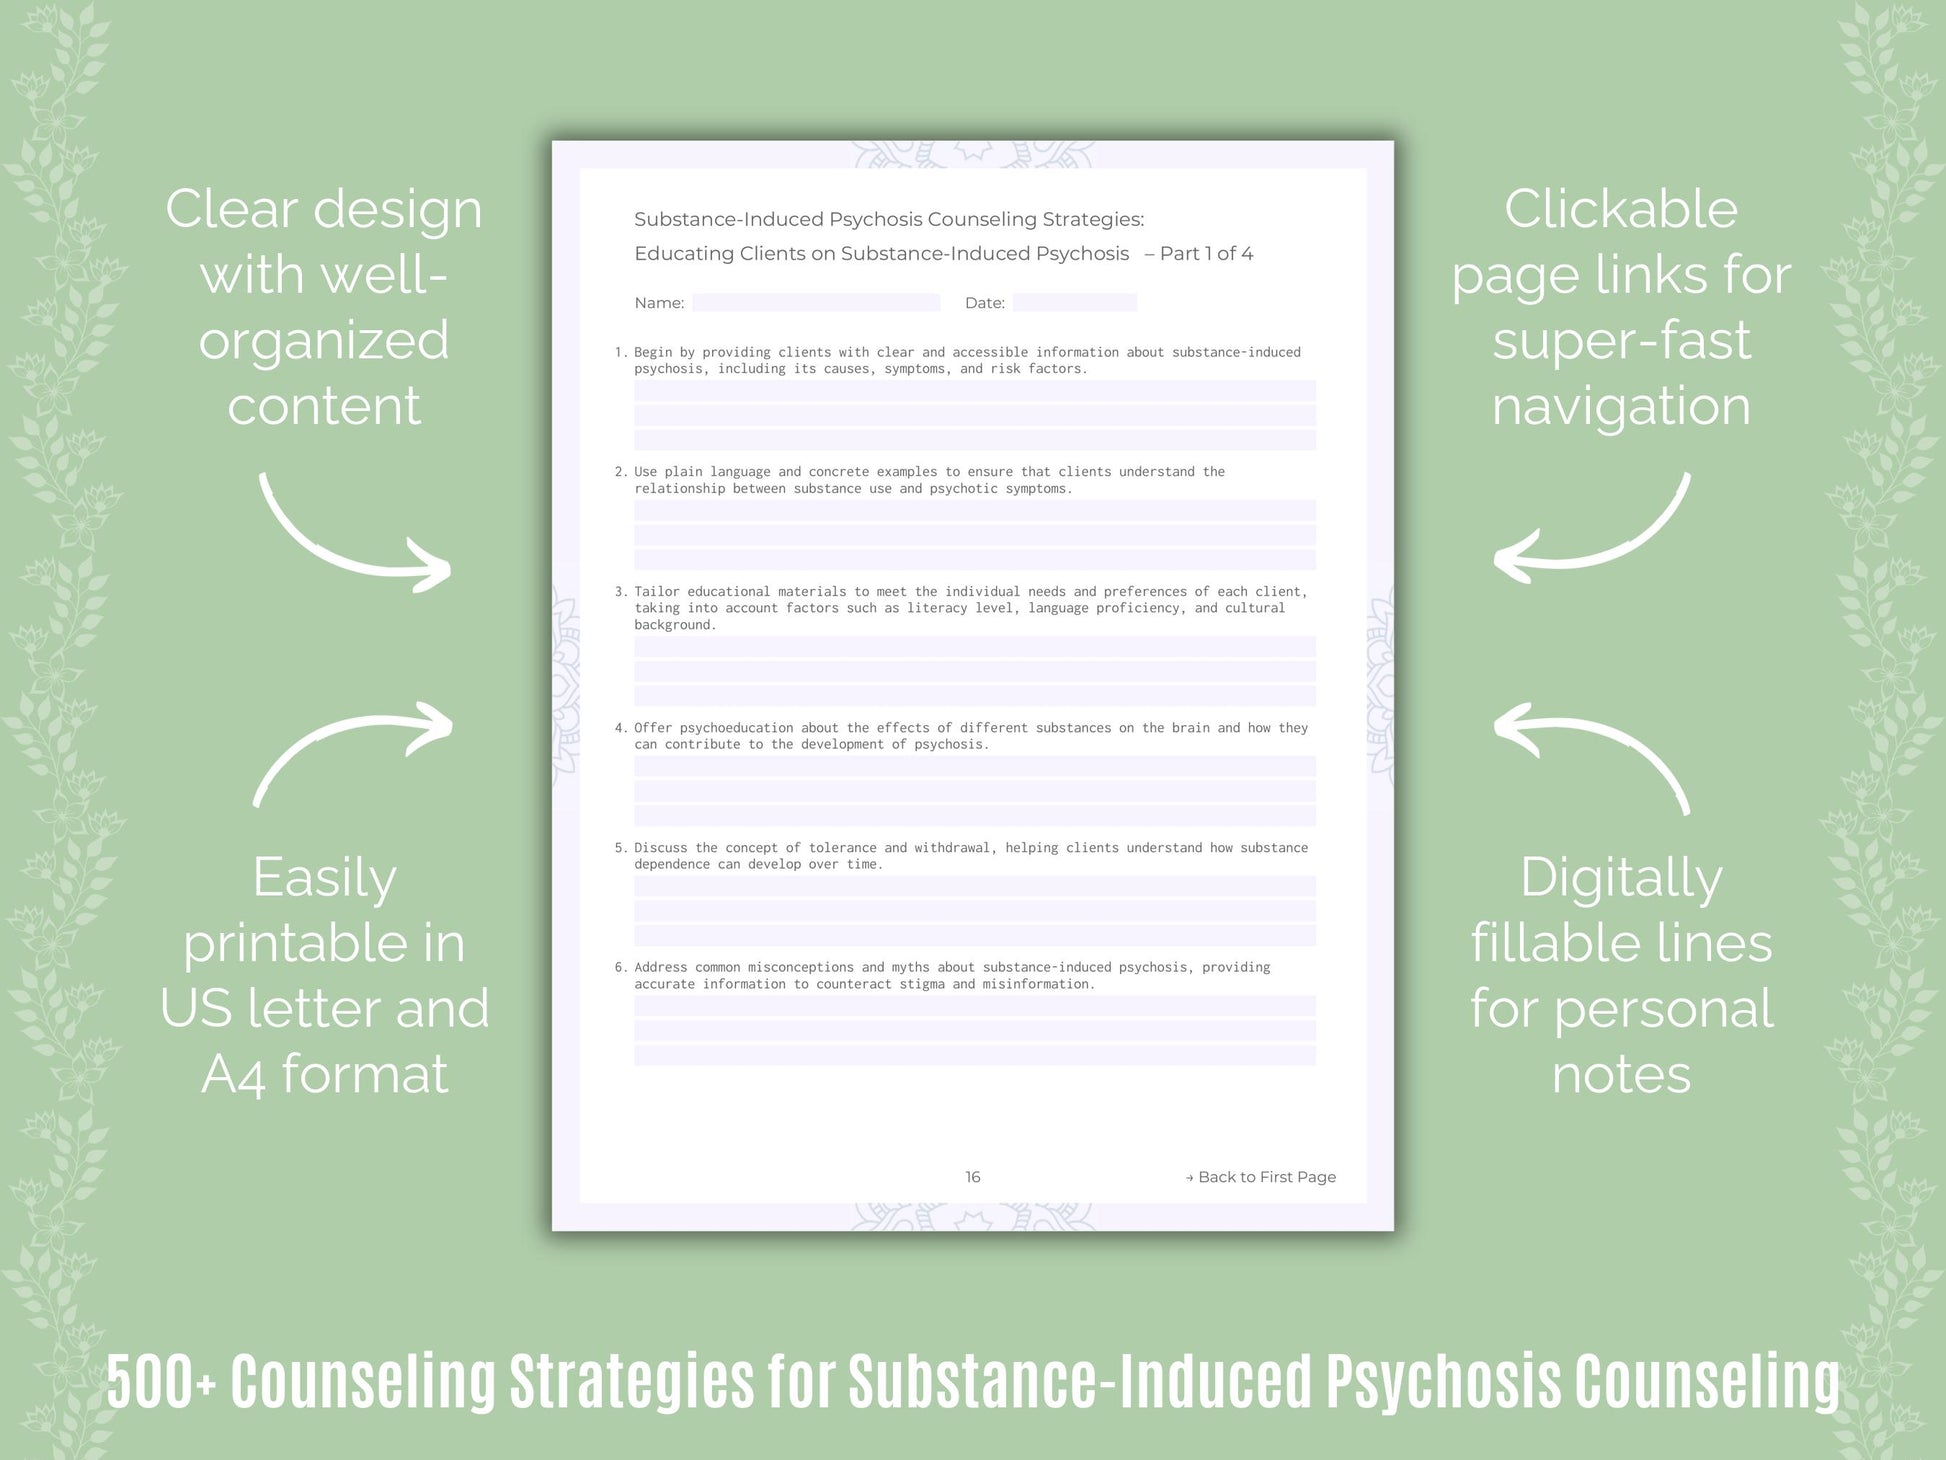 Substance-Induced Psychosis Counseling Resource